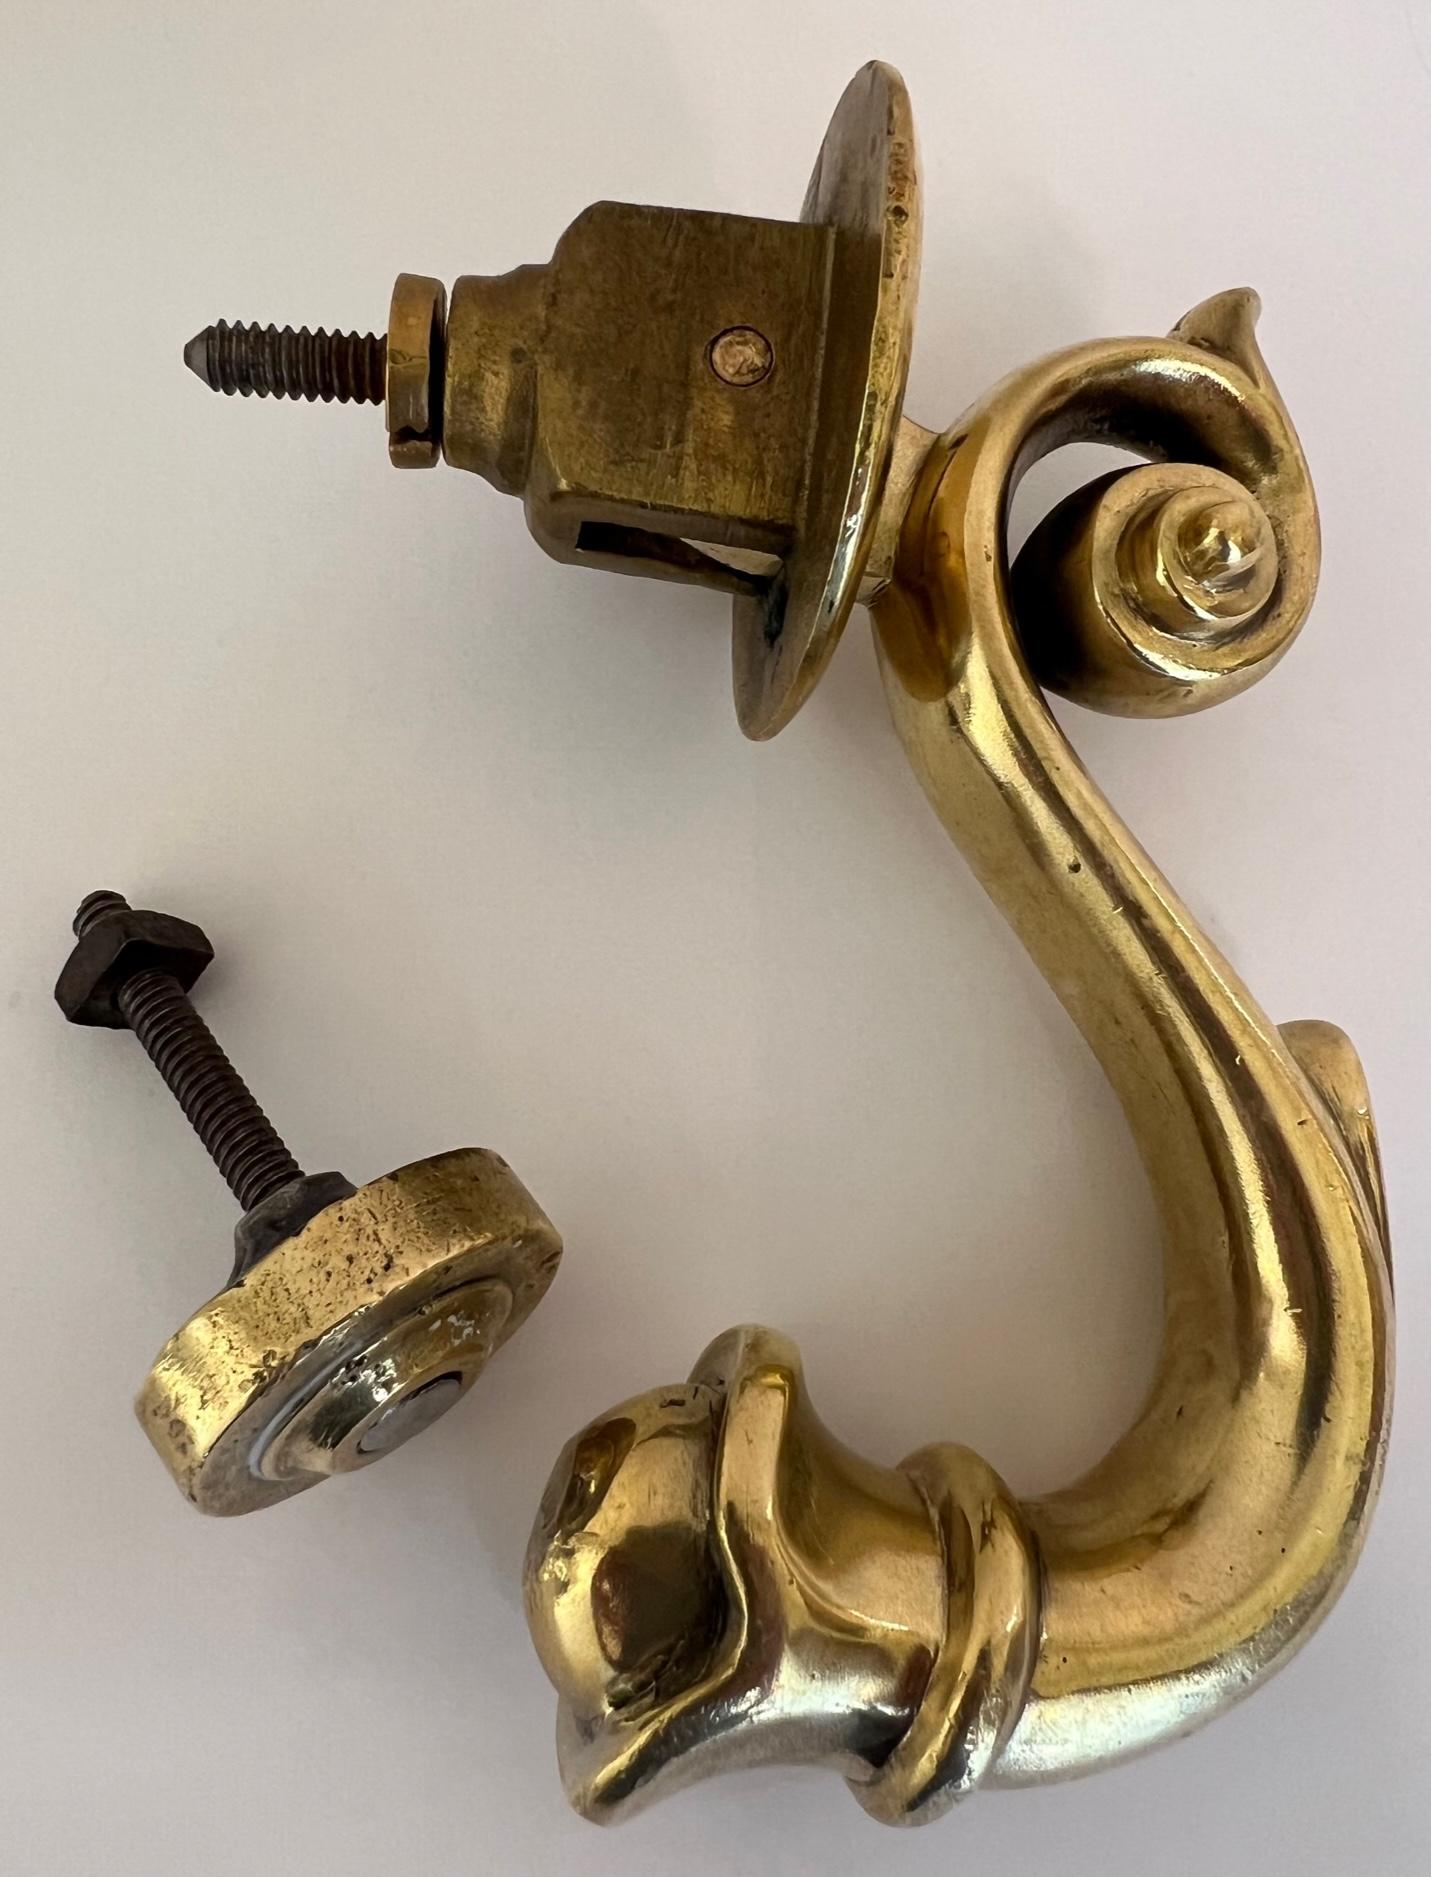 Antique brass French door knocker in a French flourish and swirl at the top. The backplate paired is round with an iron screw.